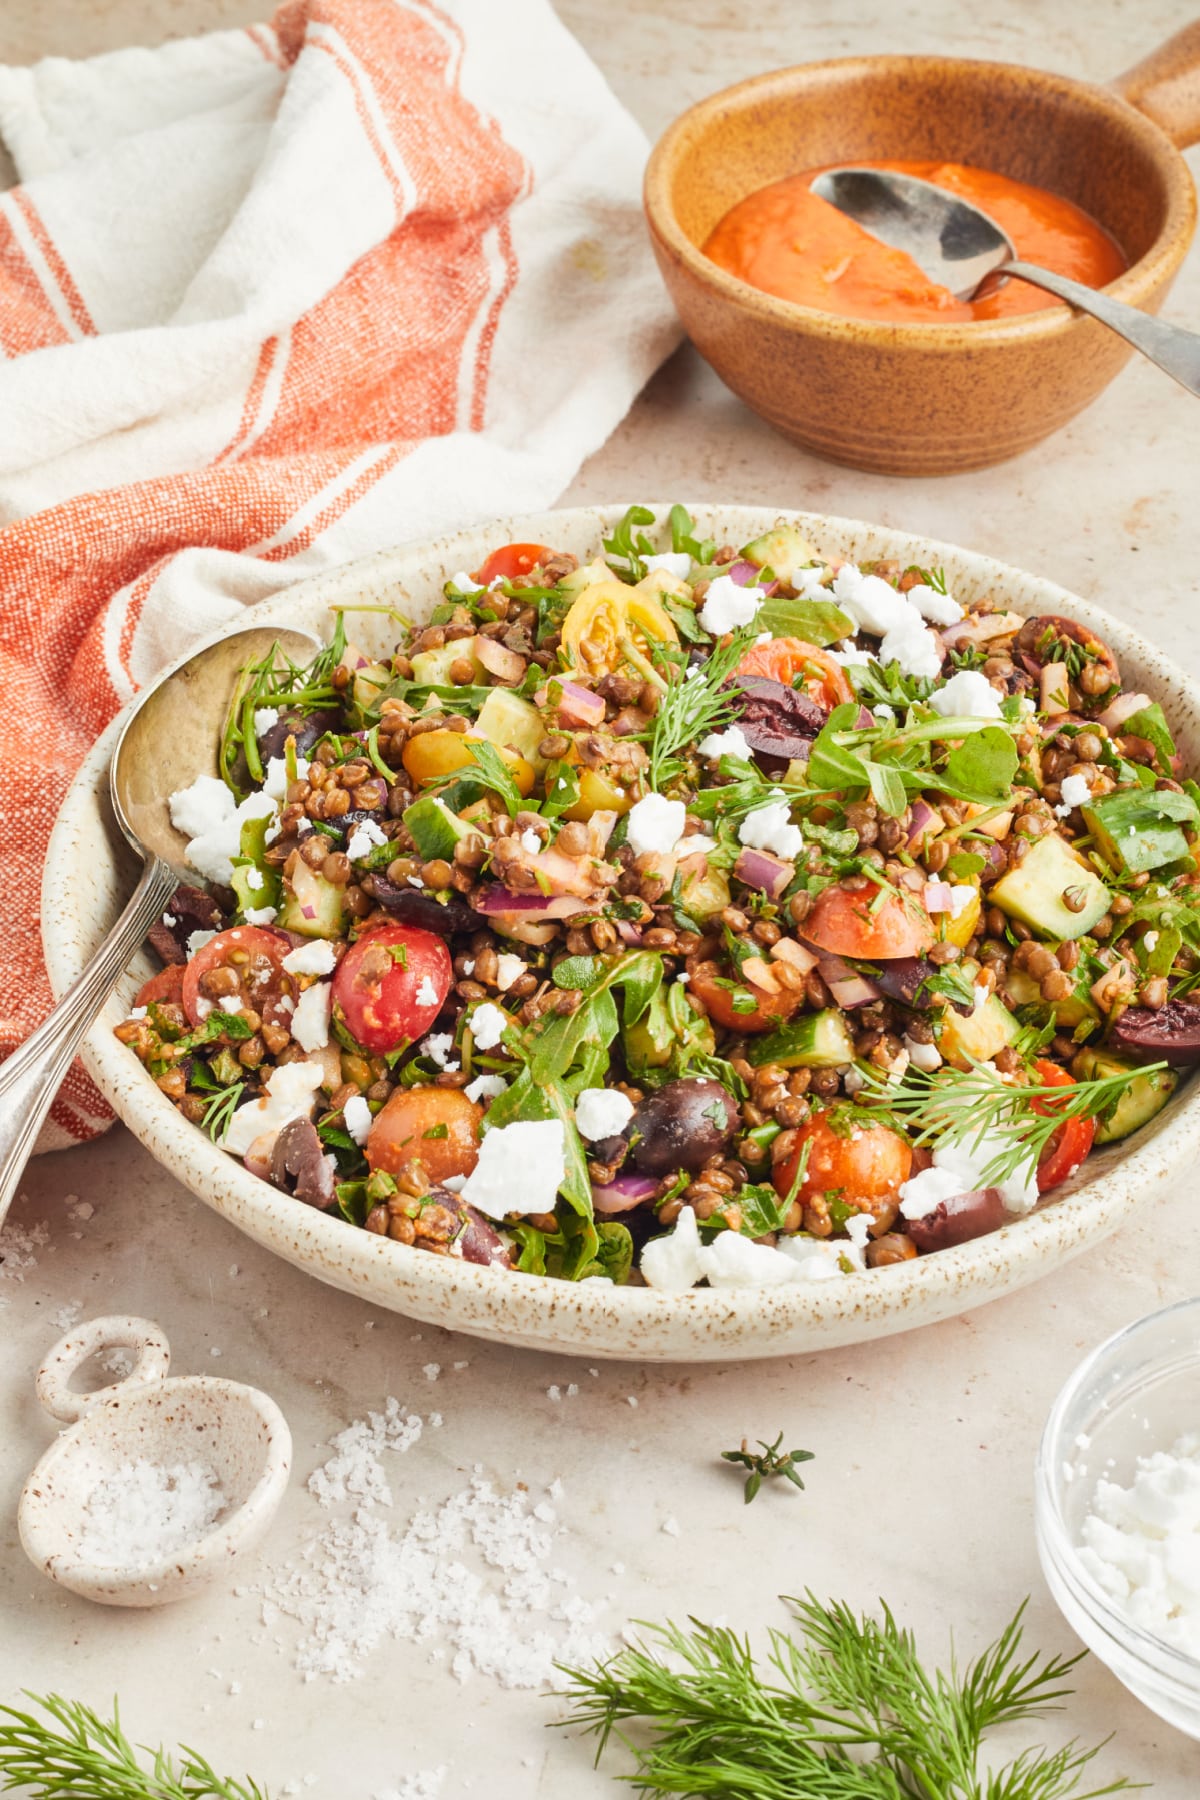 Serving bowl of colorful Mediterranean lentil salad consisting of lentils, sliced cherry tomatoes, sliced cucumber, fresh herbs, dairy free feta cheese. A small bowl of bright orange sun dried tomato dressing sits on the side with an orange and white striped cloth napkin.